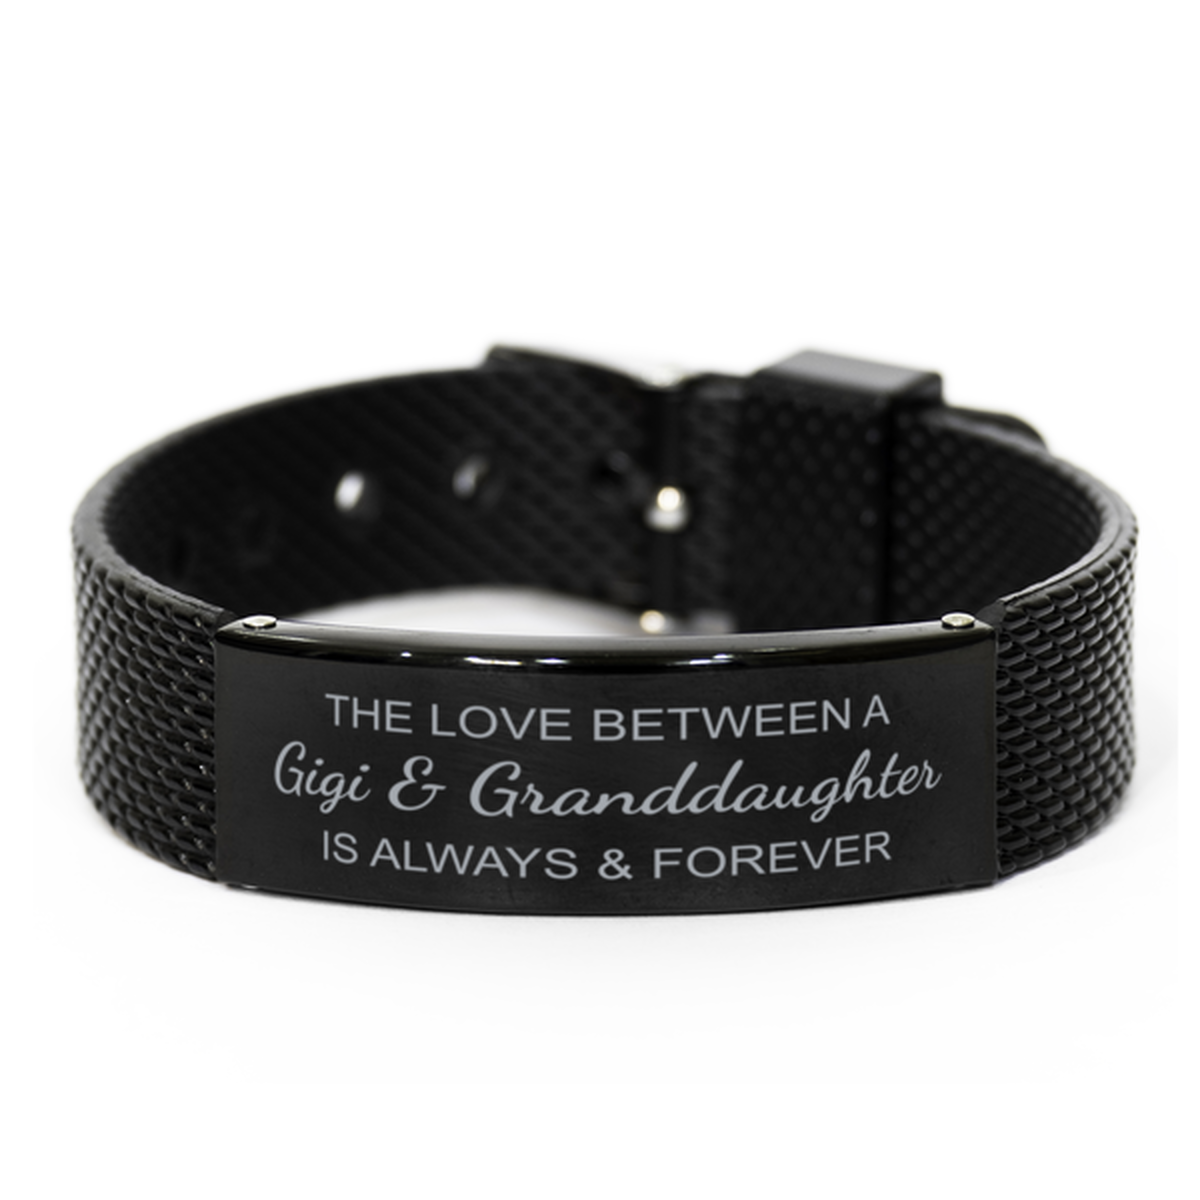 The Love Between a Gigi and Granddaughter is Always and Forever Bracelet, Gigi Granddaughter Bracelet, Black Stainless Steel Leather Bracelet, Christmas.